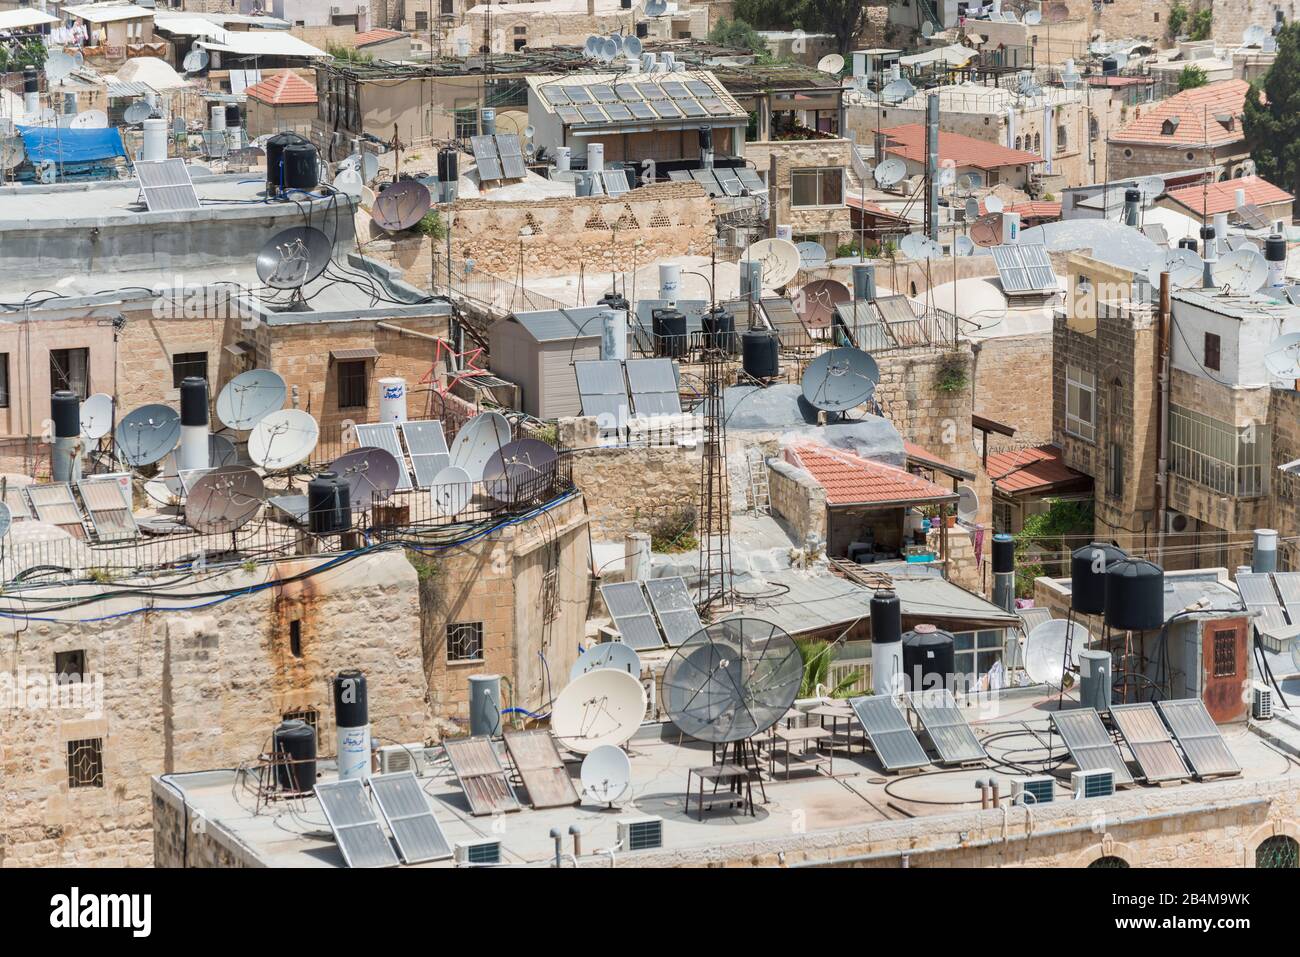 Middle East, Israel, Jerusalem, roofs of the old city with satellite dishes, solar panels and water tanks Stock Photo